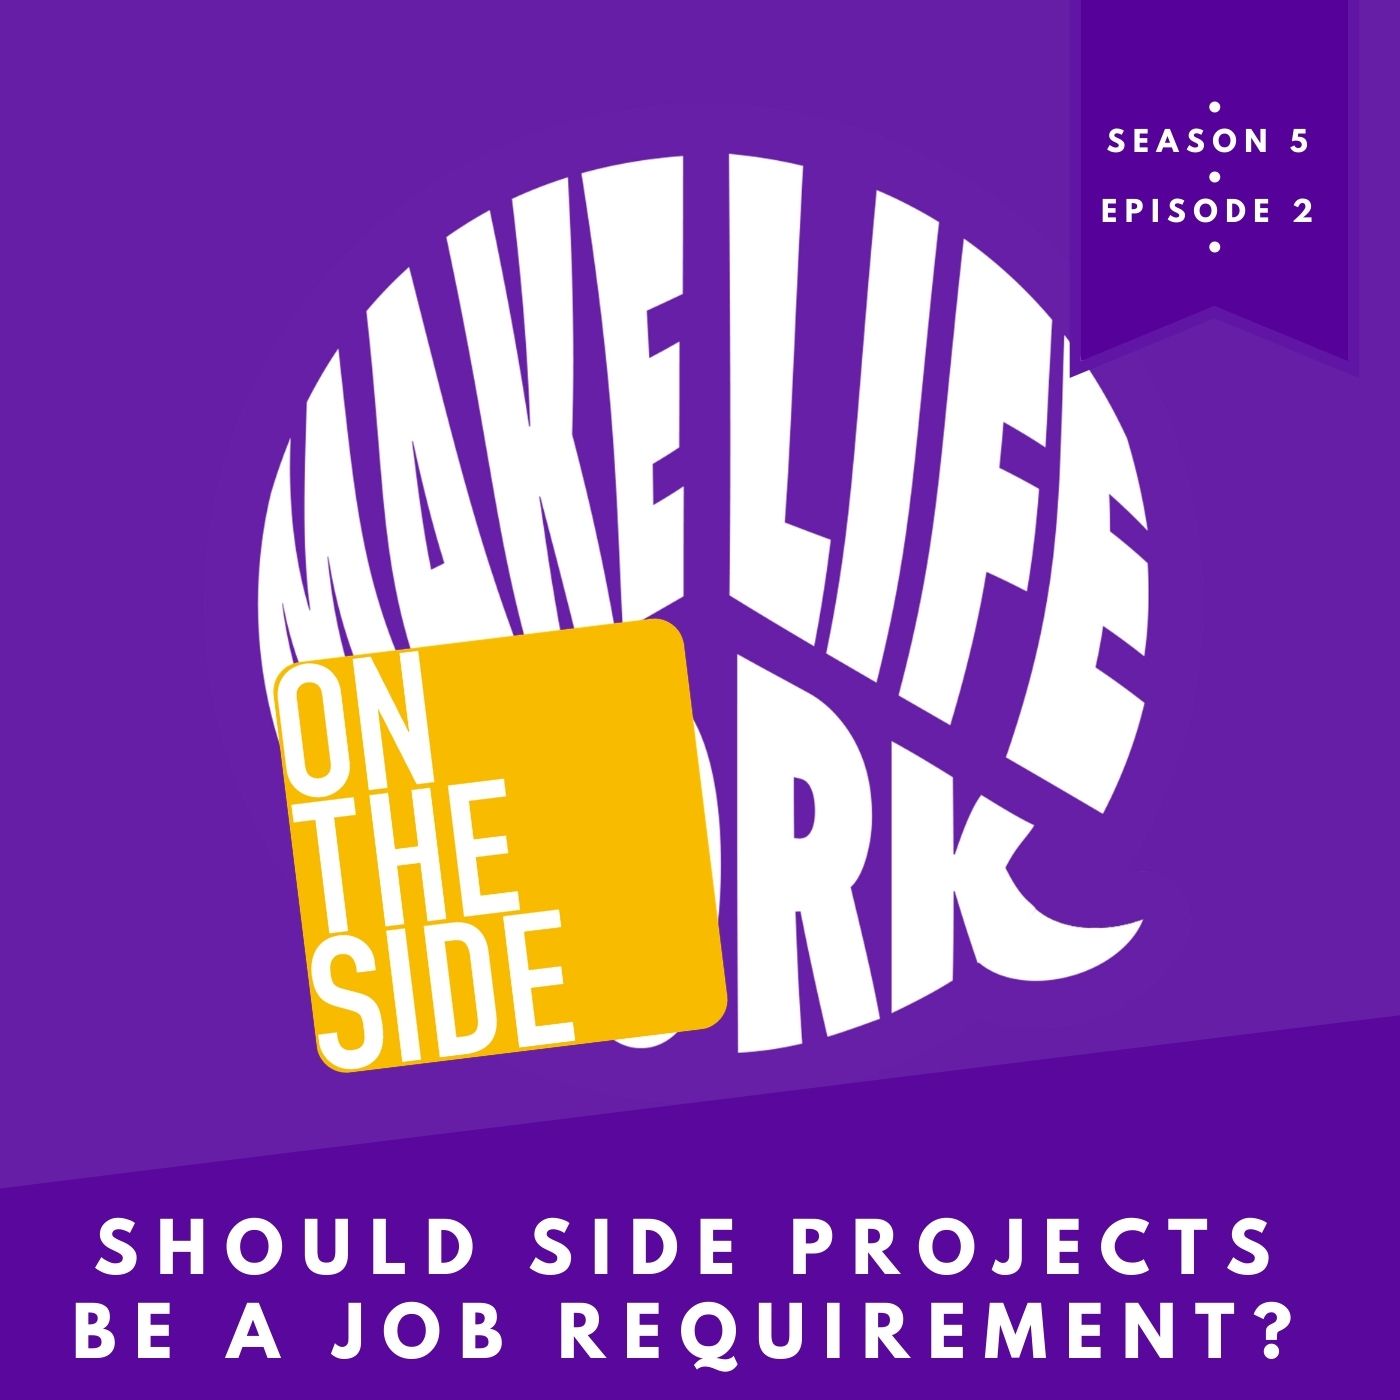 Should Side Projects Be A Job Requirement?